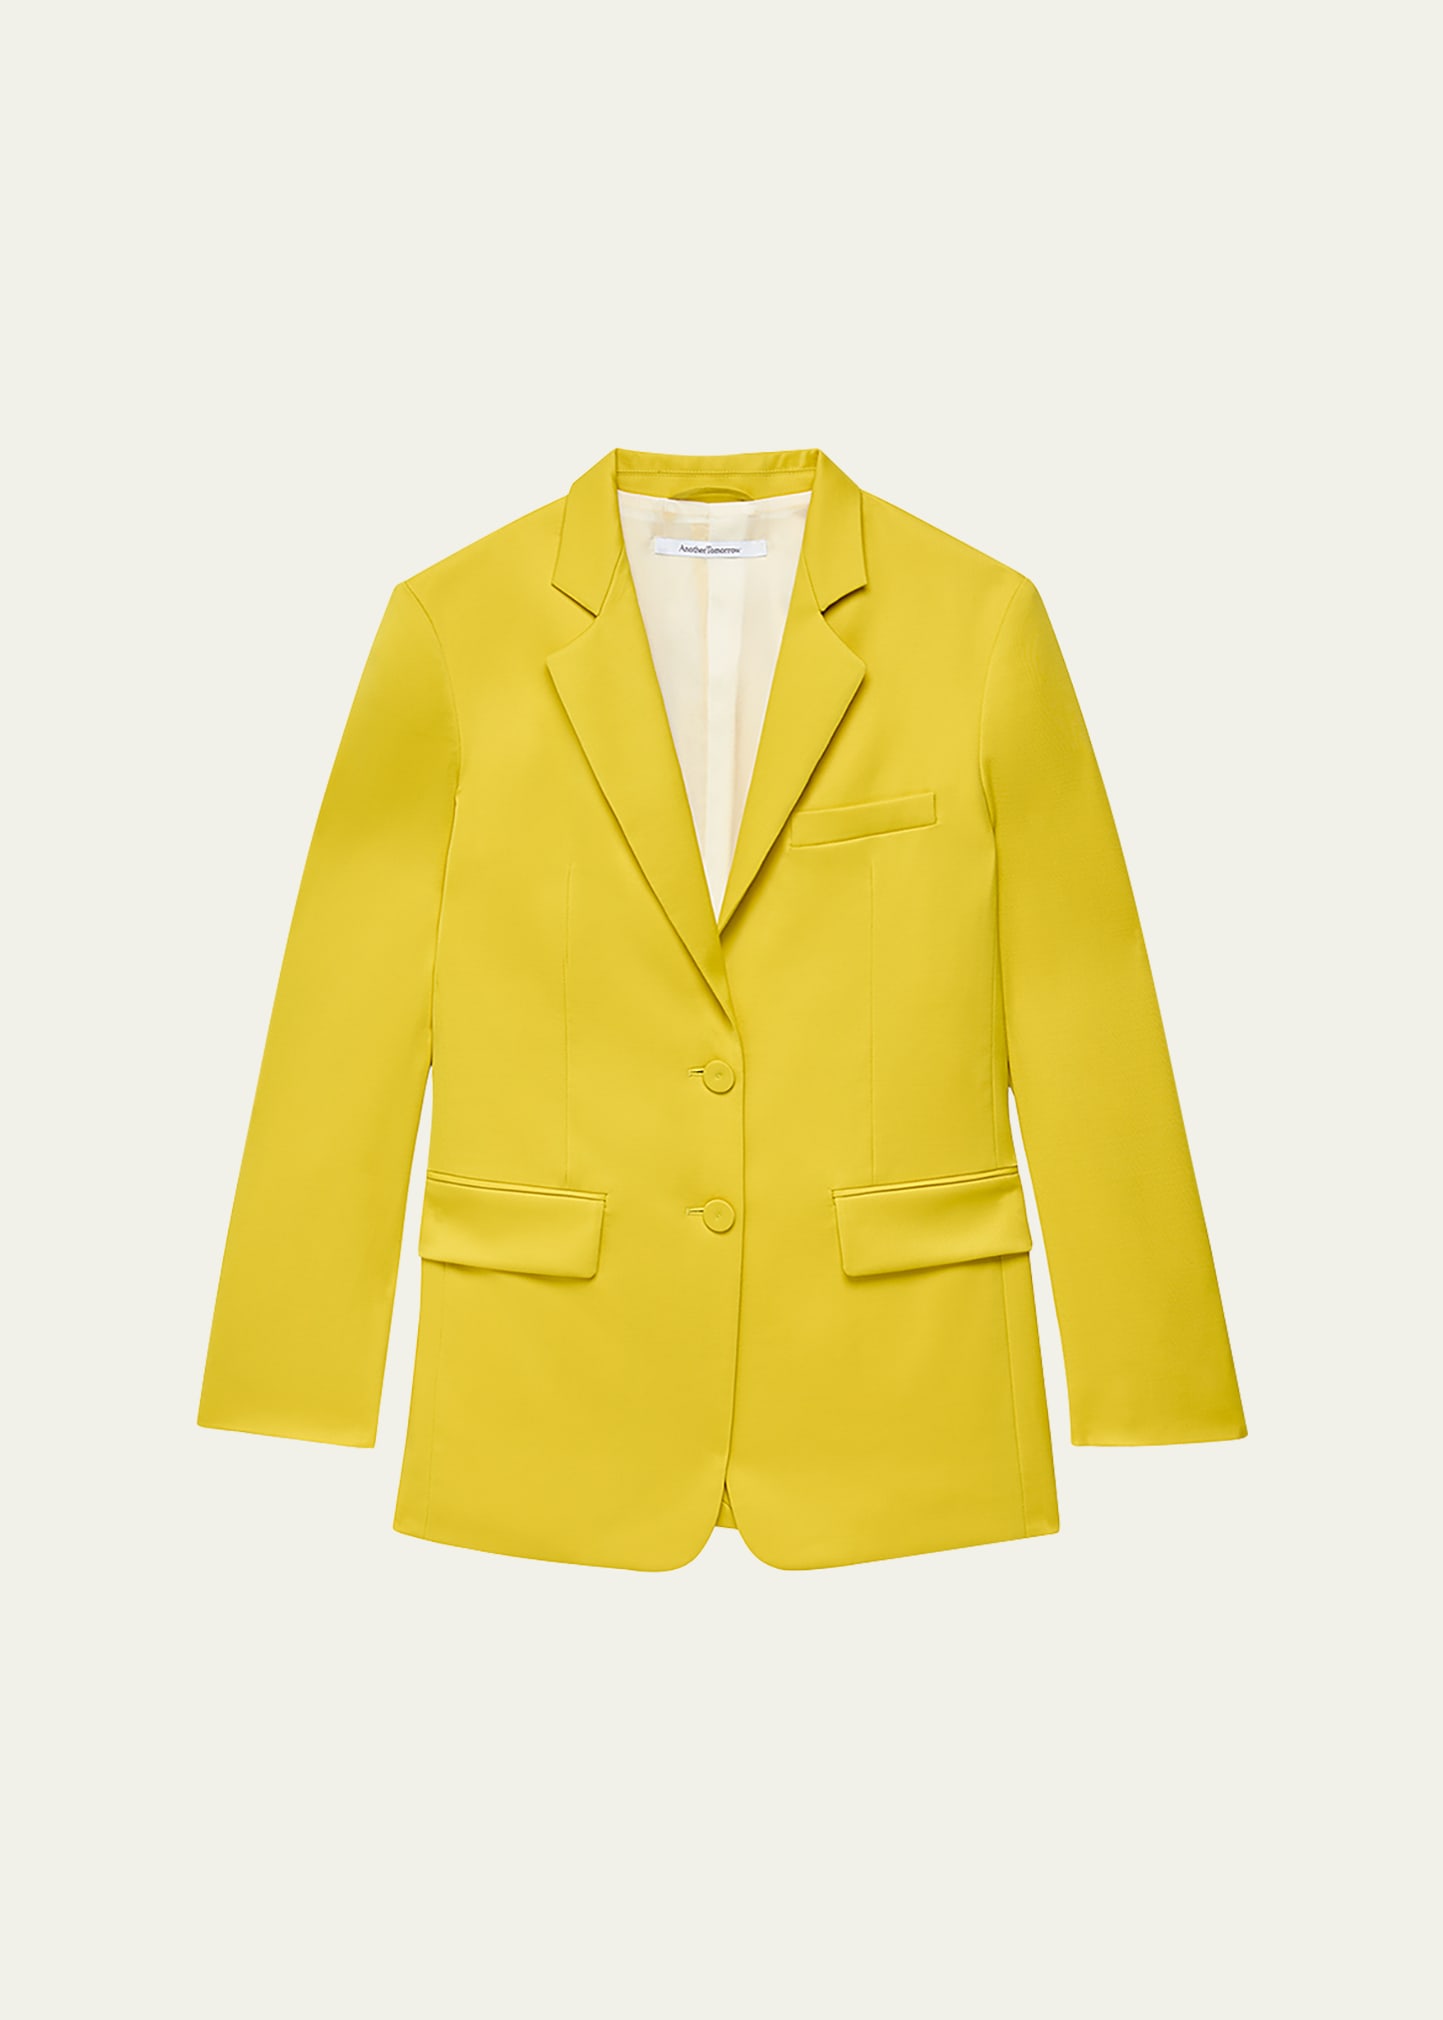 Another Tomorrow Oversized Stretch Wool Blazer In Bright Chartreuse